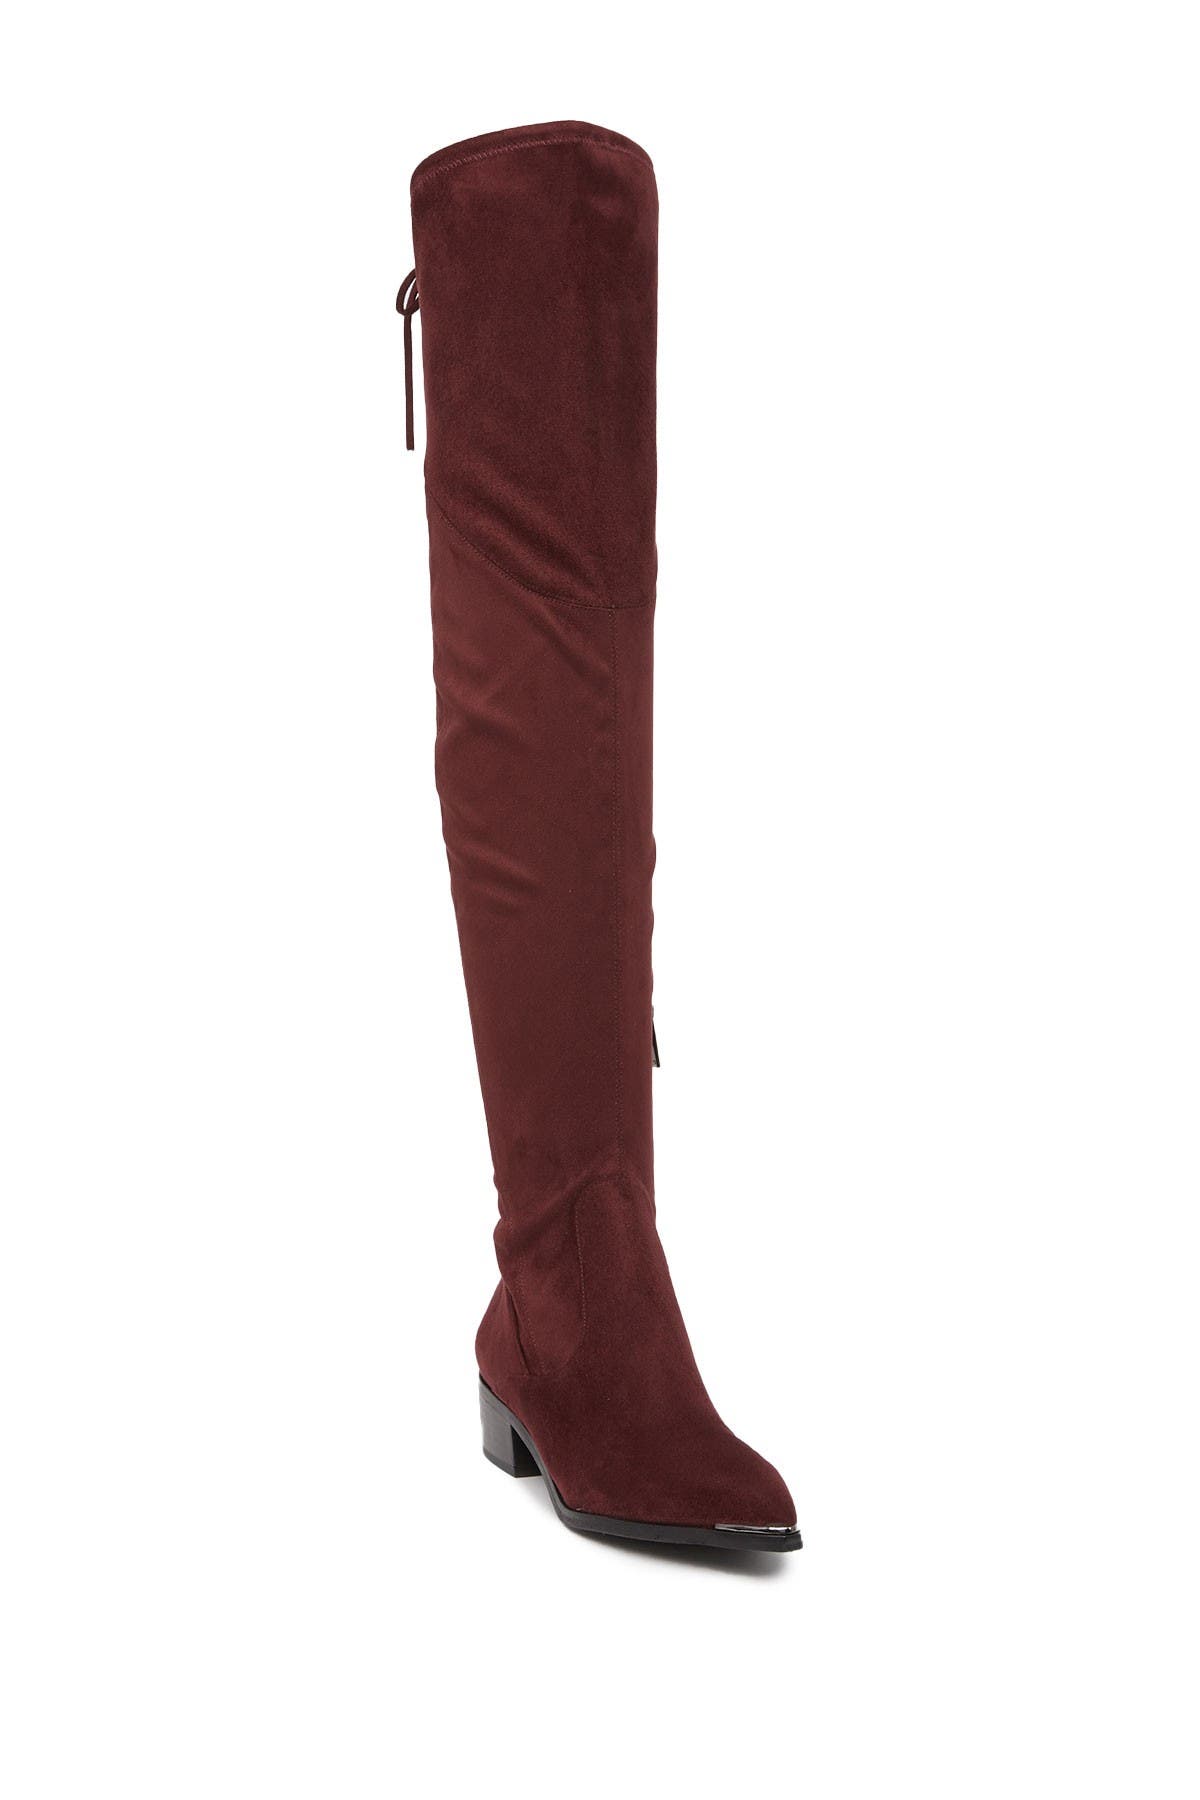 narrow over the knee boots